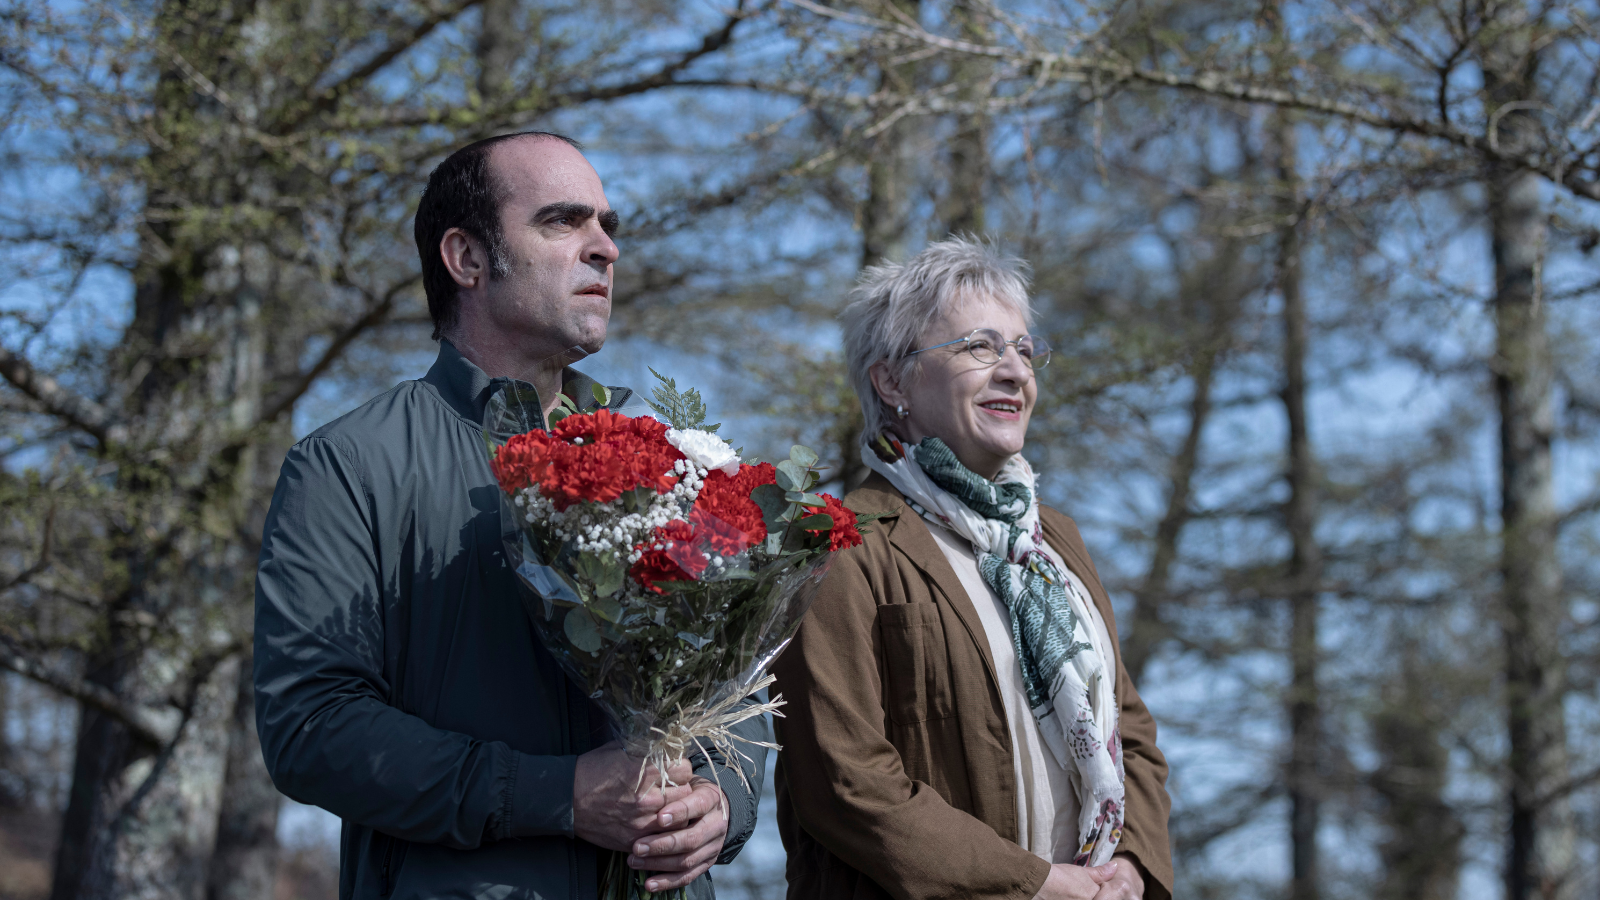 A man with short black hair holding a bouquet of red roses, next to an older woman with short grey hair wearing glasses and a scarf. They are outside on a winter's day, looking out to something in the distance.